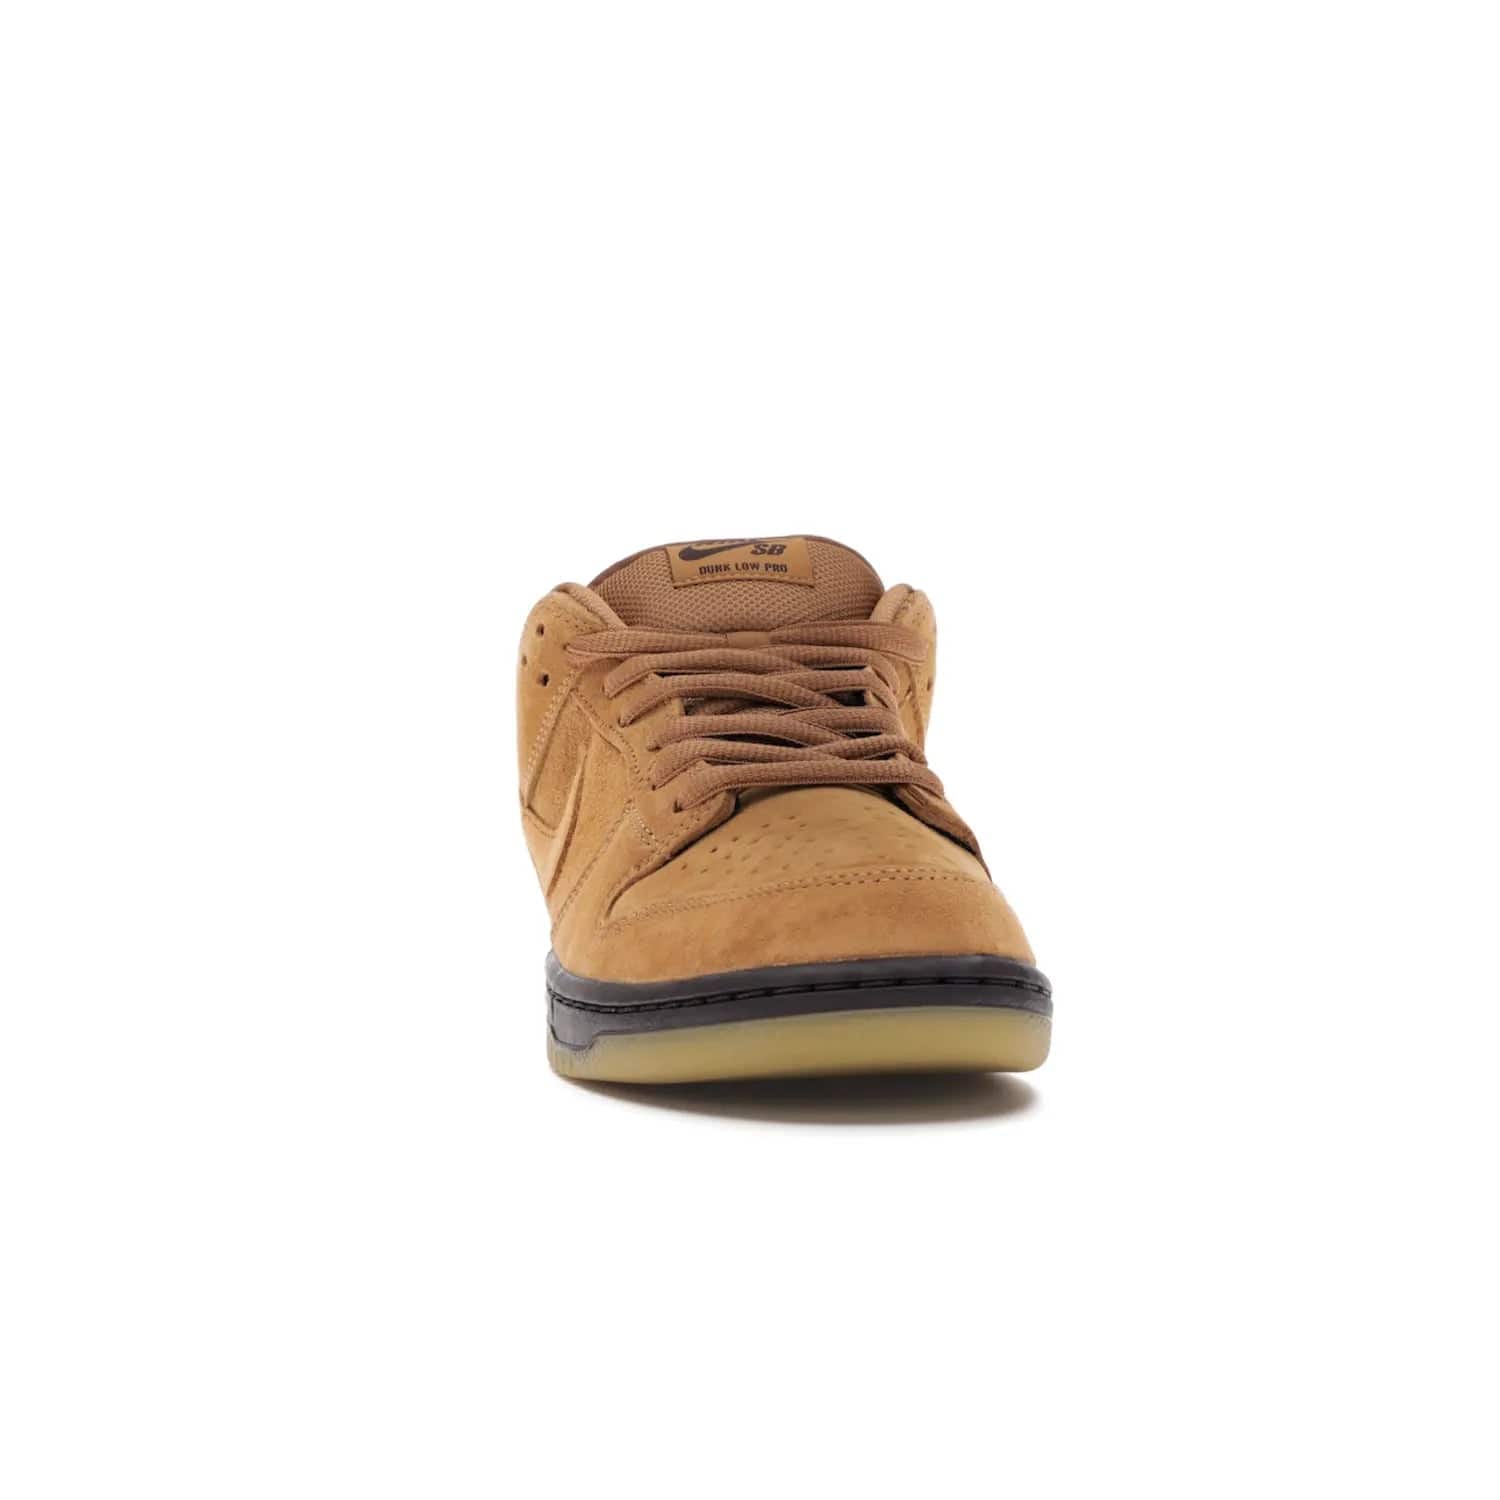 Nike SB Dunk Low Wheat (2021/2023) - Image 9 - Only at www.BallersClubKickz.com - The Nike SB Dunk Low Wheat (2021/2023)has a sleek silhouette and wheat suede upper. Tan tones for lining, mesh tongues, and laces. Iconic color palette midsole, perforated boxing toe. Brown branding on tongue and heel. Gum rubber outsole with partitioned pattern for traction. Eschewed in Feb 2021 for $110.